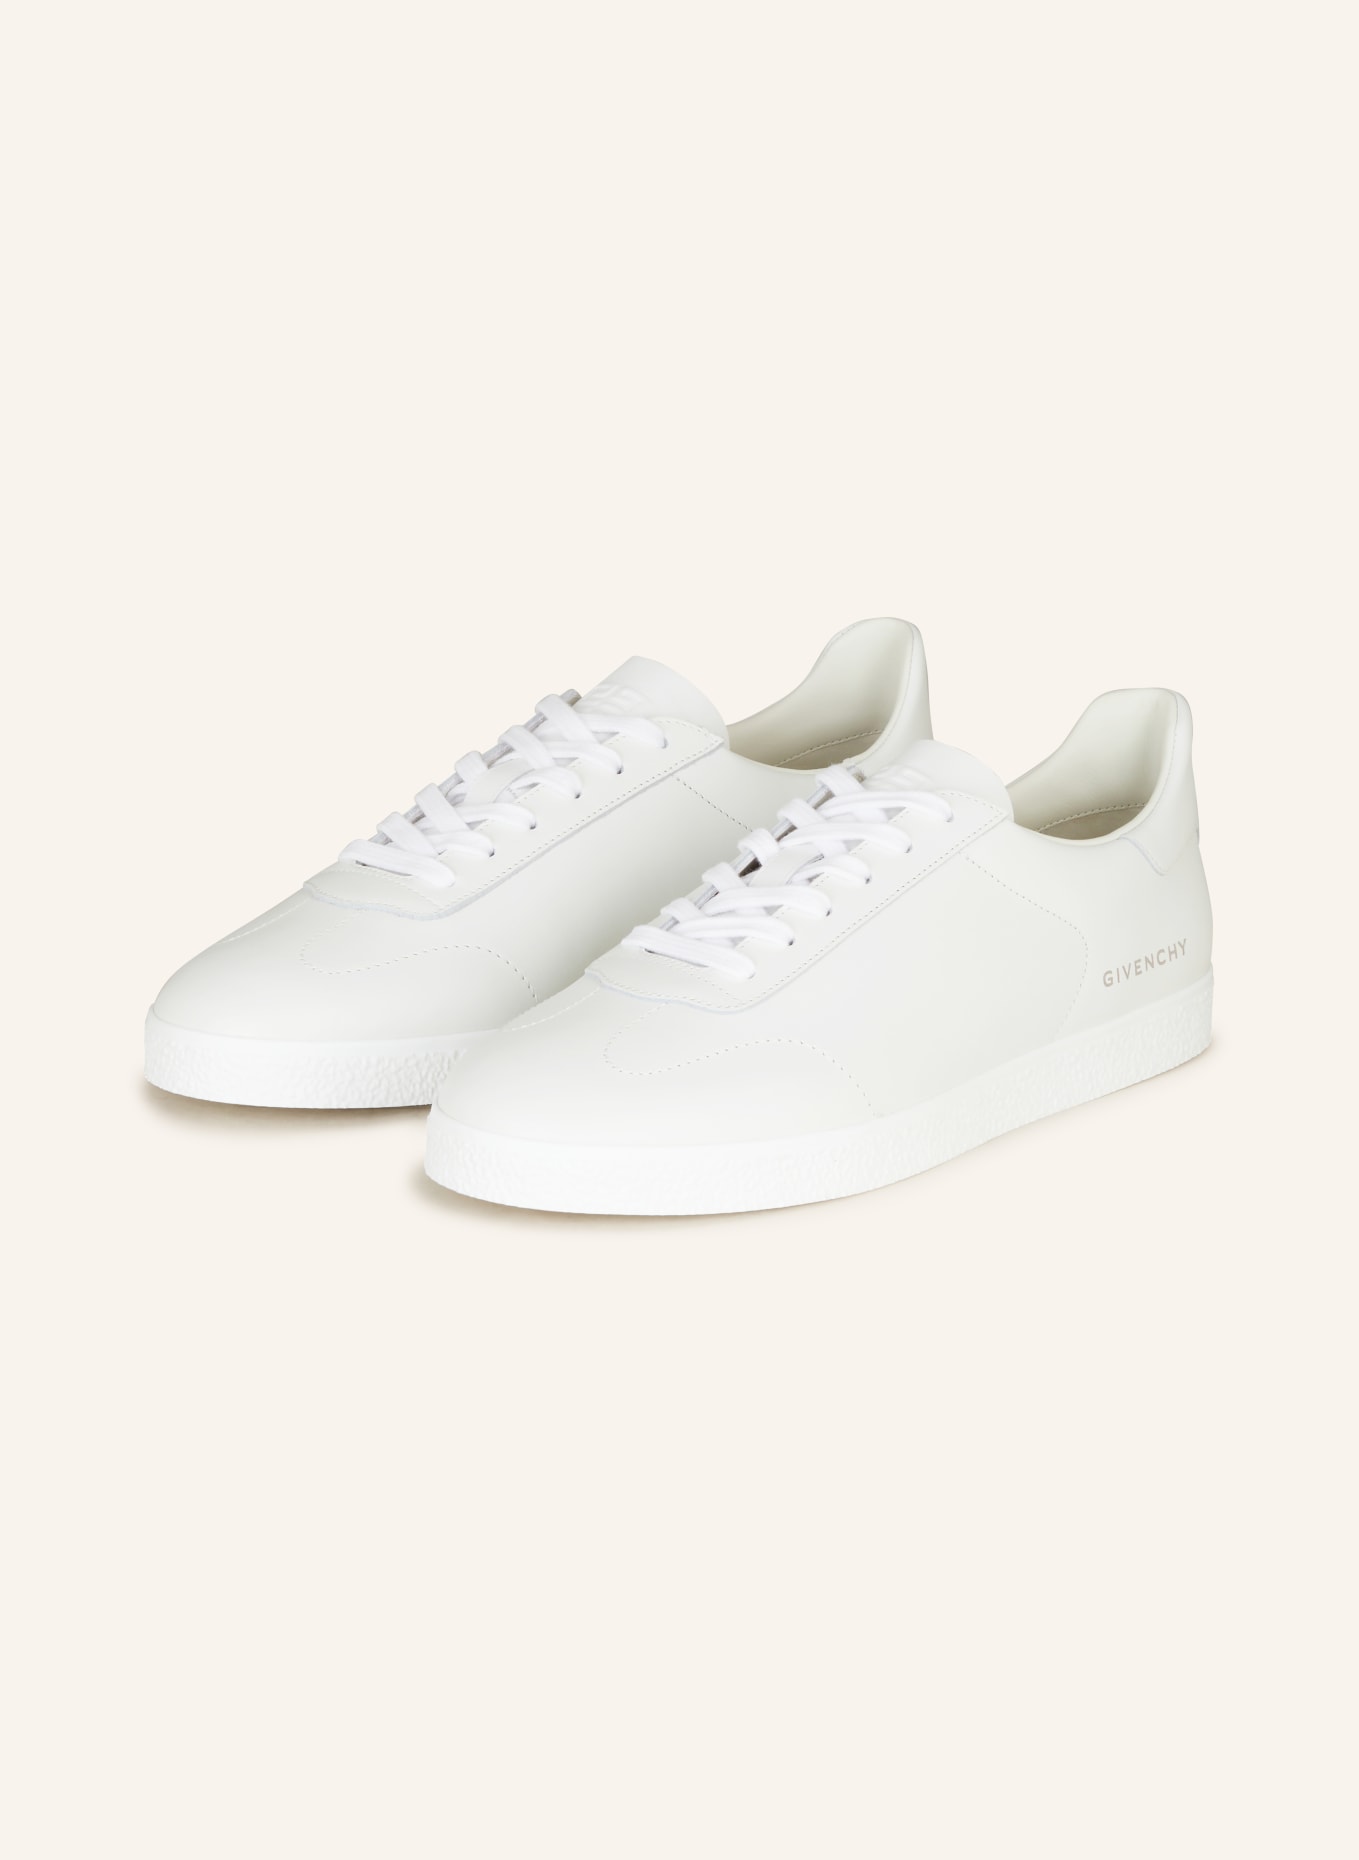 GIVENCHY Sneaker TOWN, Farbe: WEISS (Bild 1)